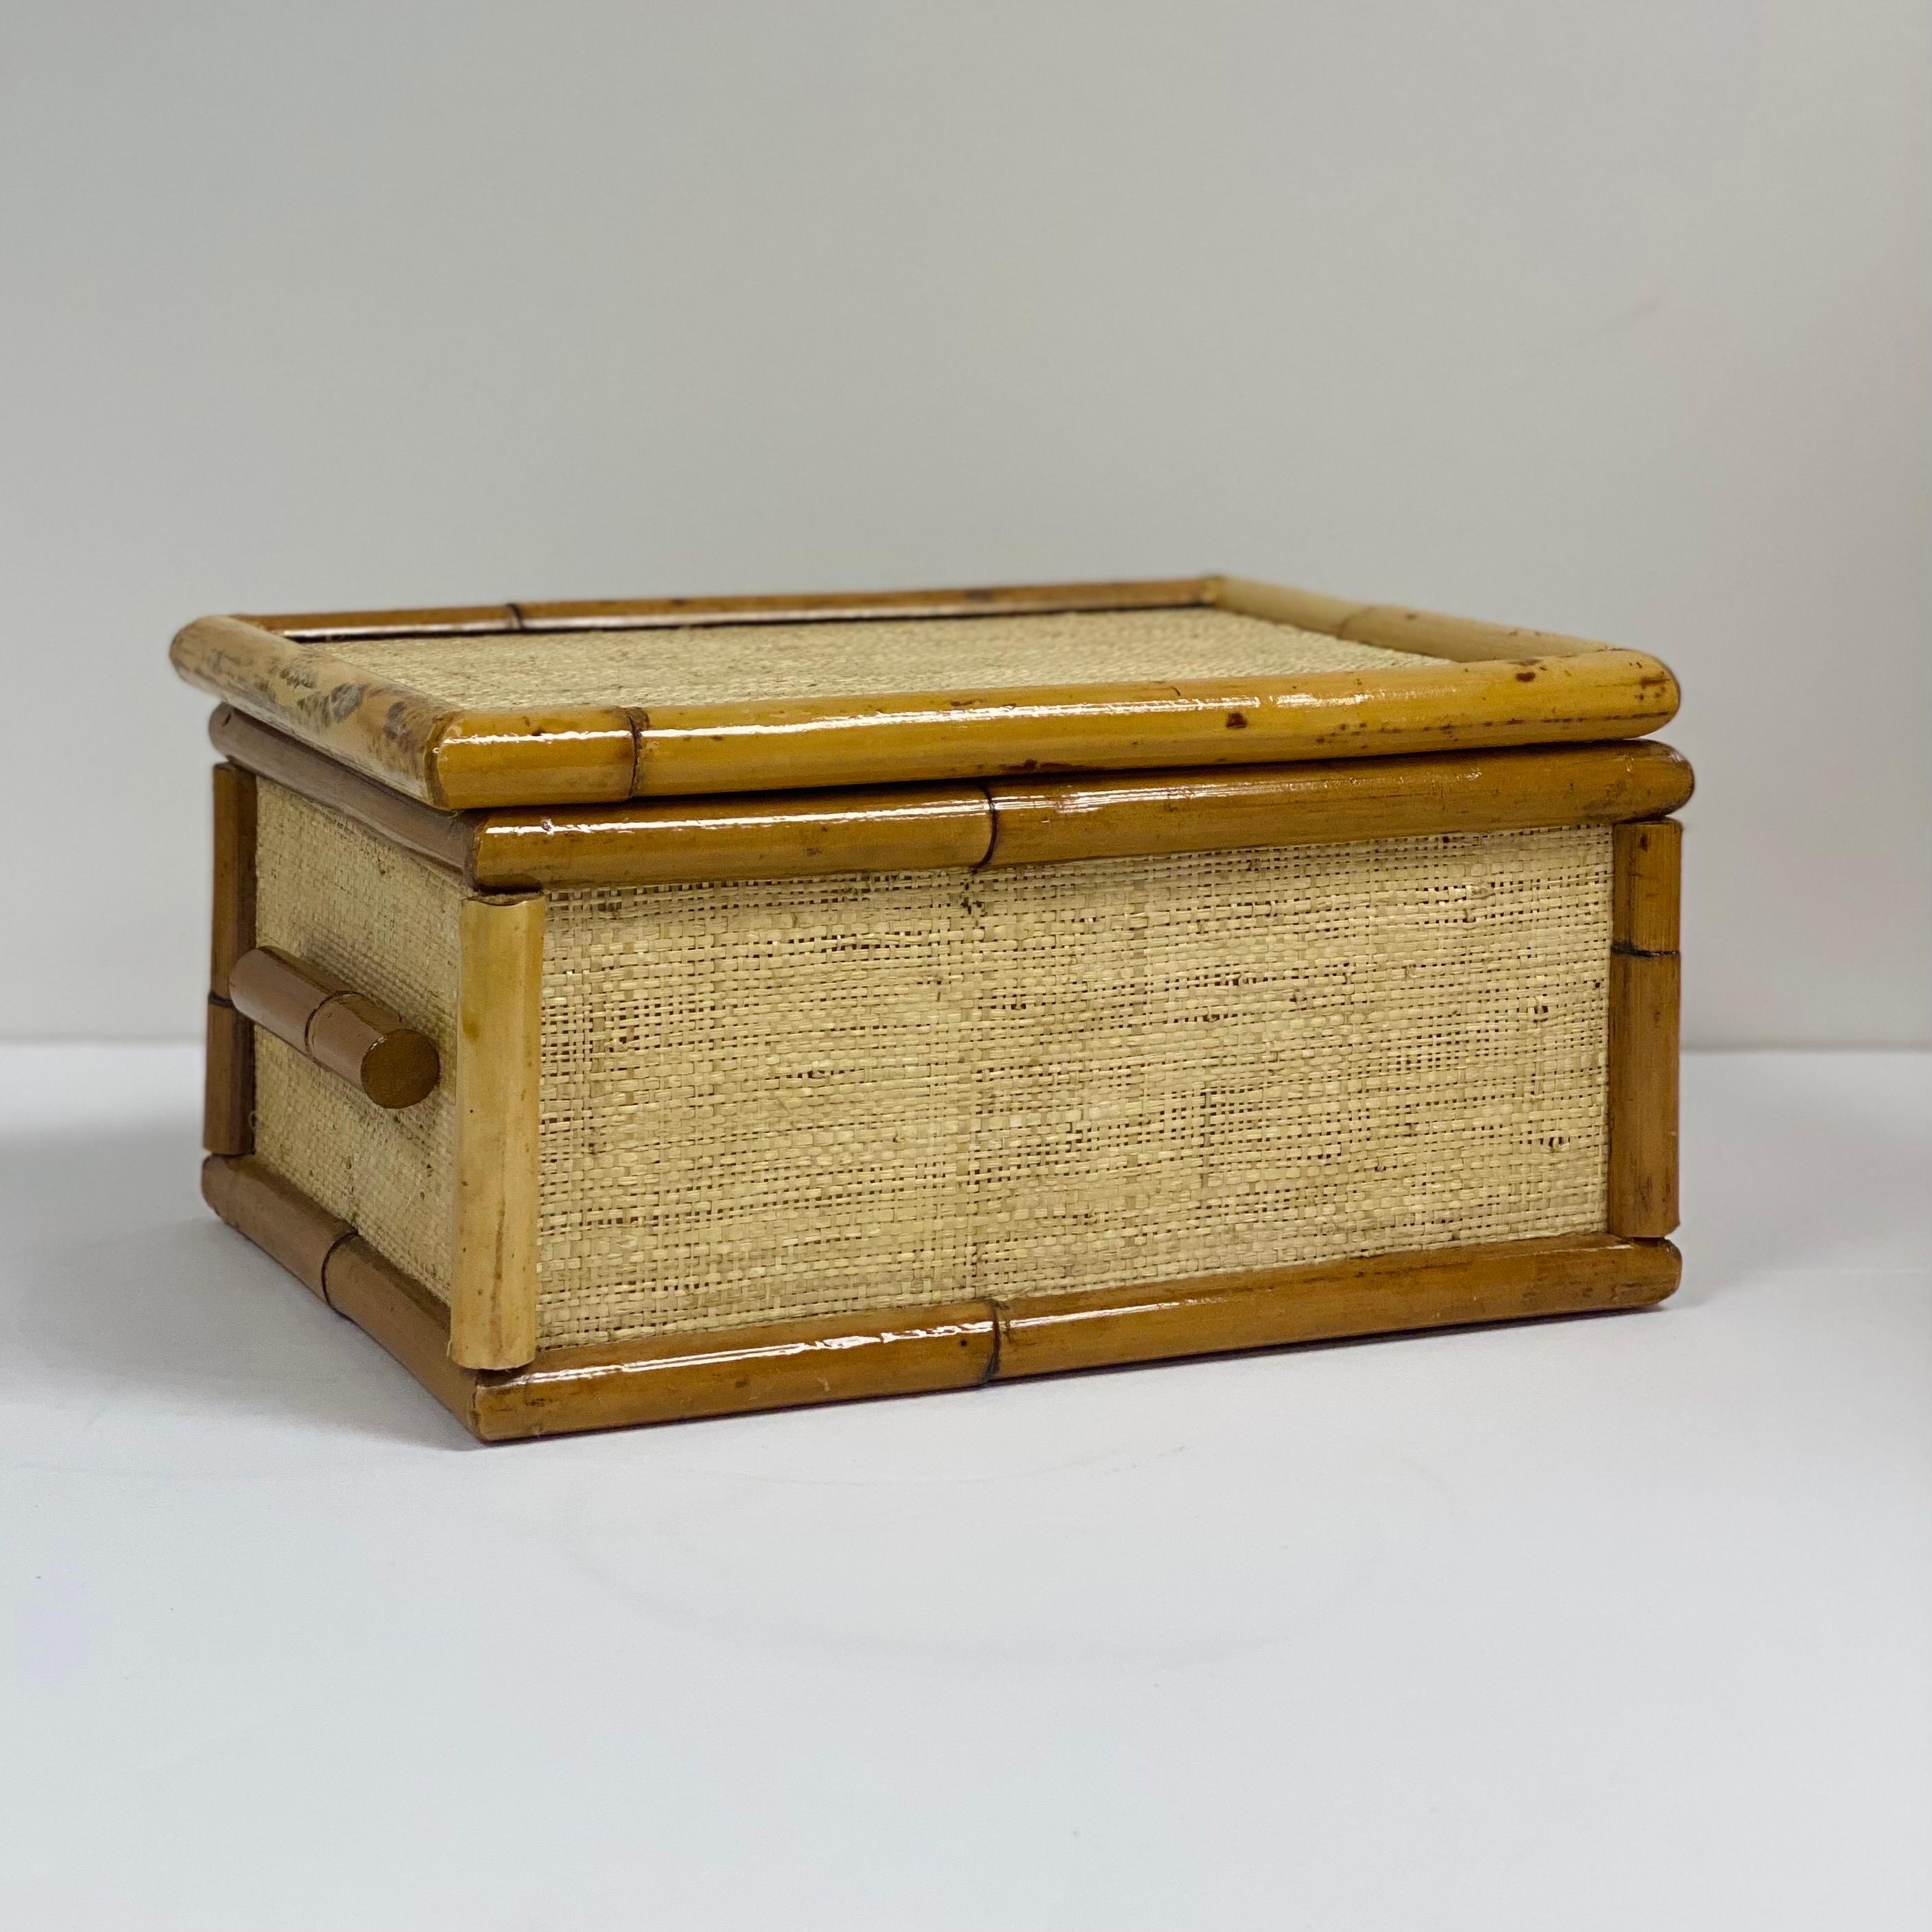 We are very pleased to offer a beautiful box, circa the 1970s. This handmade piece is woven from natural plant fibers for an organic look and feel. Taking on a rectangular silhouette, this box is wrapped in a neutral brown-hued jute grasscloth and